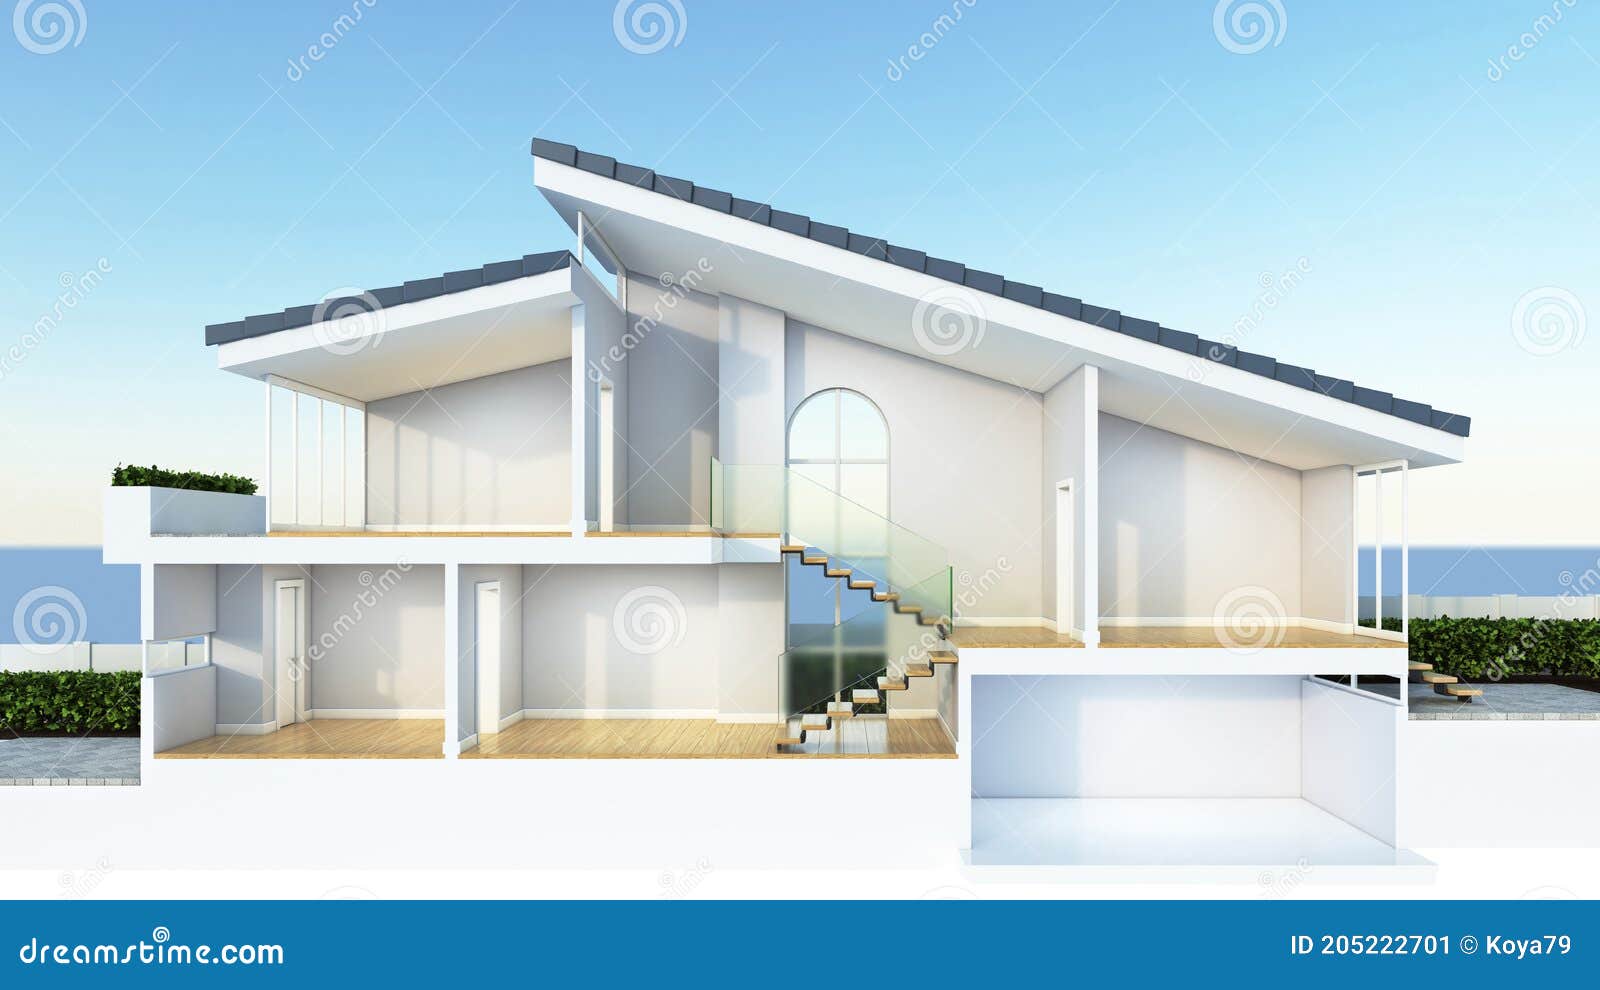 modern home cross section, suitable for smart home or sustainable housing infographic overlay, 3d rendering